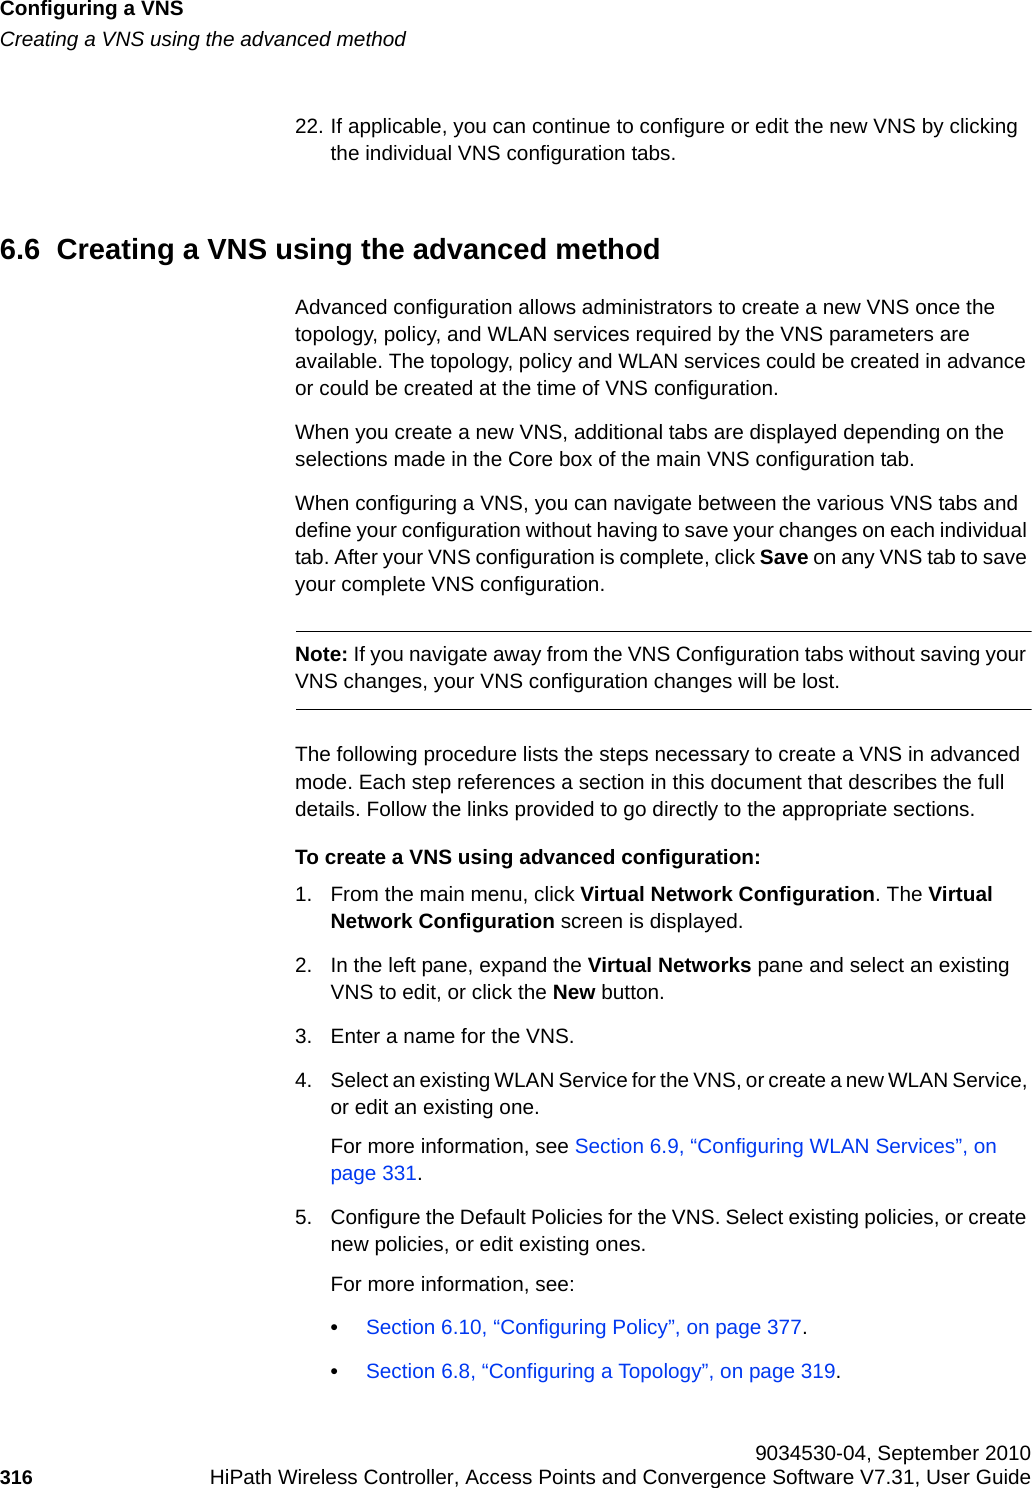 Configuring a VNShwc_vnsconfiguration.fmCreating a VNS using the advanced method 9034530-04, September 2010316 HiPath Wireless Controller, Access Points and Convergence Software V7.31, User Guide        22. If applicable, you can continue to configure or edit the new VNS by clicking the individual VNS configuration tabs.6.6  Creating a VNS using the advanced methodAdvanced configuration allows administrators to create a new VNS once the topology, policy, and WLAN services required by the VNS parameters are available. The topology, policy and WLAN services could be created in advance or could be created at the time of VNS configuration.When you create a new VNS, additional tabs are displayed depending on the selections made in the Core box of the main VNS configuration tab.When configuring a VNS, you can navigate between the various VNS tabs and define your configuration without having to save your changes on each individual tab. After your VNS configuration is complete, click Save on any VNS tab to save your complete VNS configuration.Note: If you navigate away from the VNS Configuration tabs without saving your VNS changes, your VNS configuration changes will be lost.The following procedure lists the steps necessary to create a VNS in advanced mode. Each step references a section in this document that describes the full details. Follow the links provided to go directly to the appropriate sections.To create a VNS using advanced configuration:1. From the main menu, click Virtual Network Configuration. The Virtual Network Configuration screen is displayed.2. In the left pane, expand the Virtual Networks pane and select an existing VNS to edit, or click the New button.3. Enter a name for the VNS.4. Select an existing WLAN Service for the VNS, or create a new WLAN Service, or edit an existing one.For more information, see Section 6.9, “Configuring WLAN Services”, on page 331.5. Configure the Default Policies for the VNS. Select existing policies, or create new policies, or edit existing ones.For more information, see:•Section 6.10, “Configuring Policy”, on page 377.•Section 6.8, “Configuring a Topology”, on page 319.